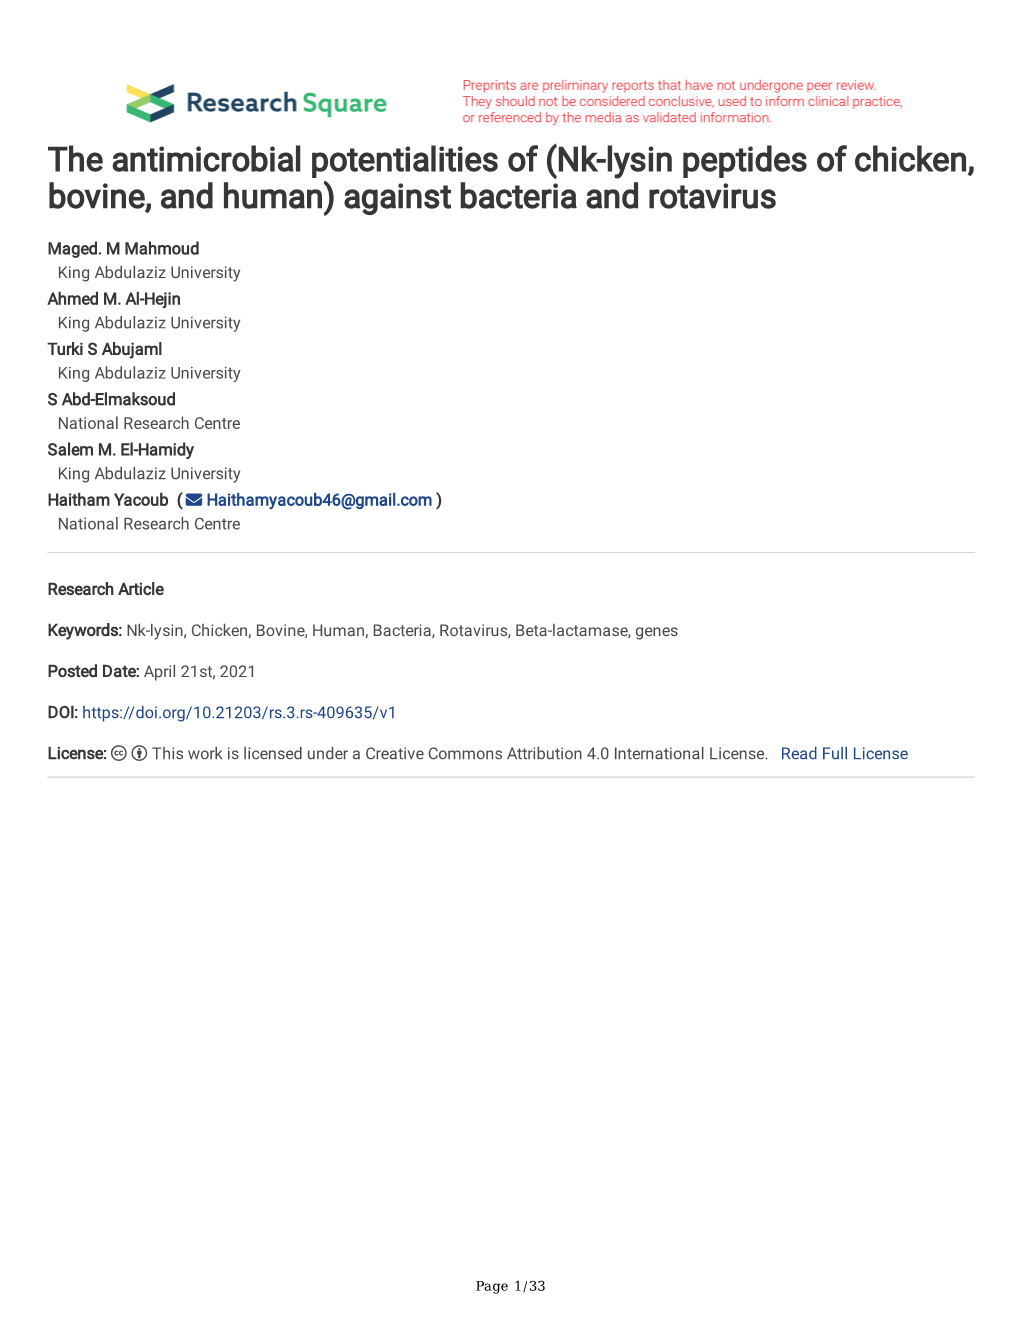 The Antimicrobial Potentialities of (Nk-Lysin Peptides of Chicken, Bovine, and Human) Against Bacteria and Rotavirus